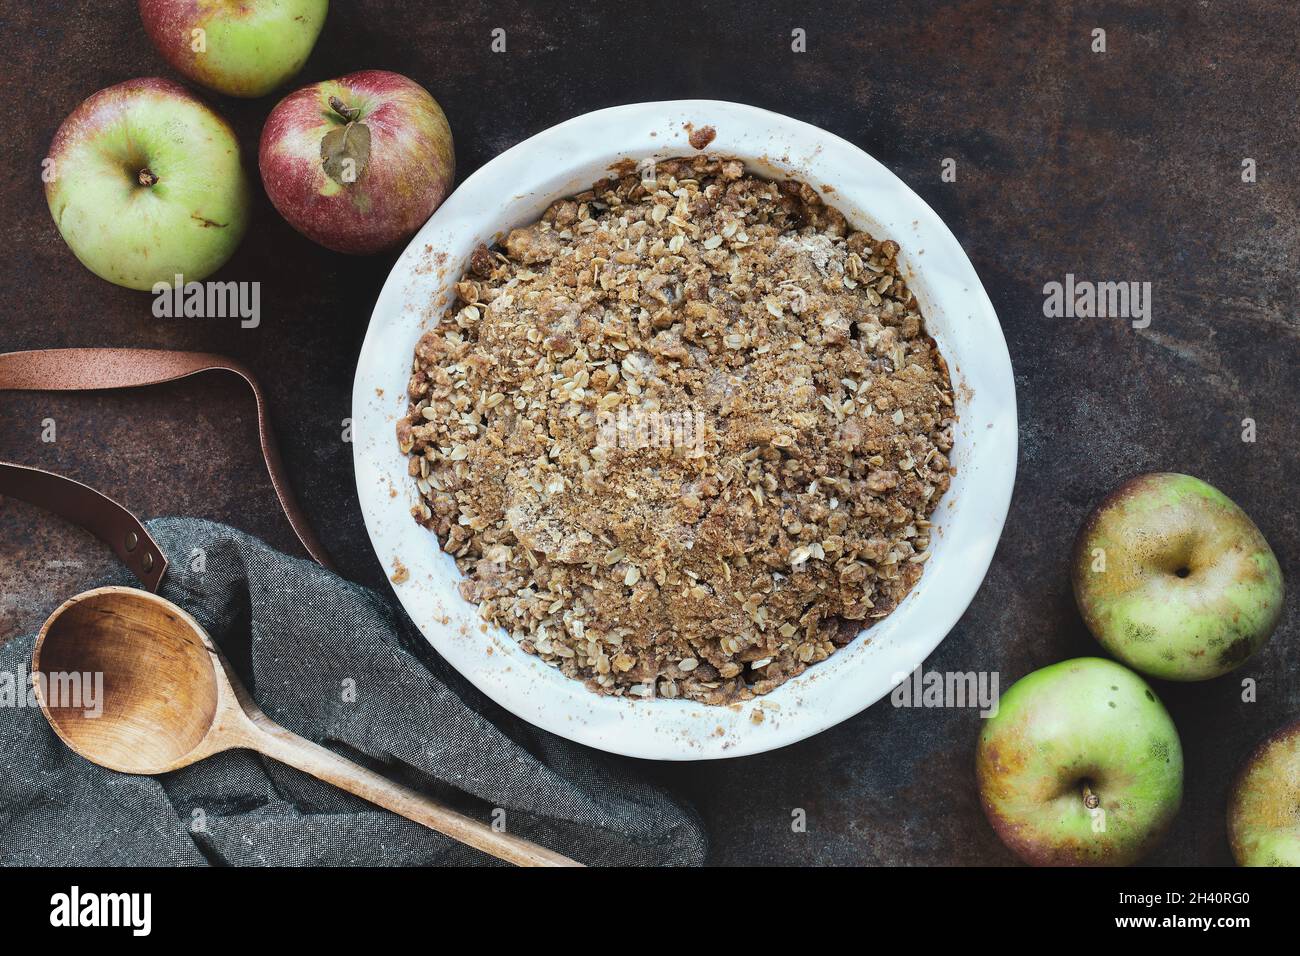 Fresh hot homemade apple crisp or crumble with crunchy streusel topping topped over rustic background with wooden spoon. Top view. Stock Photo